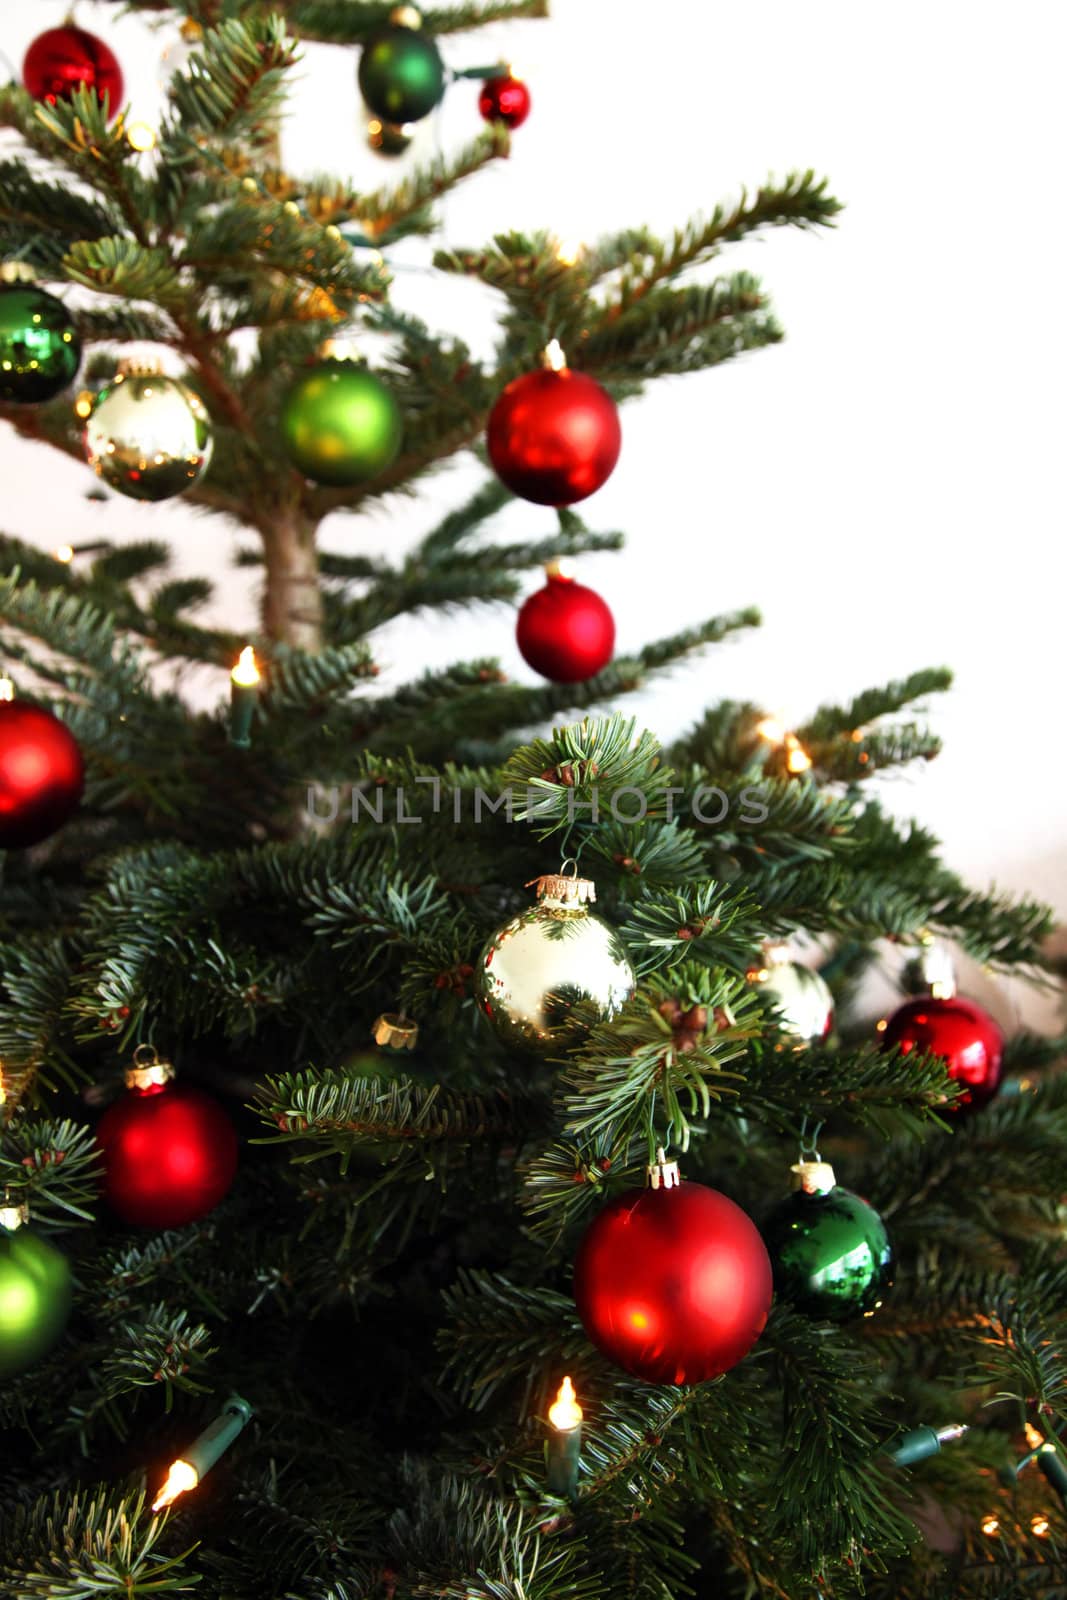 Christmas tree with red and green globes, close up